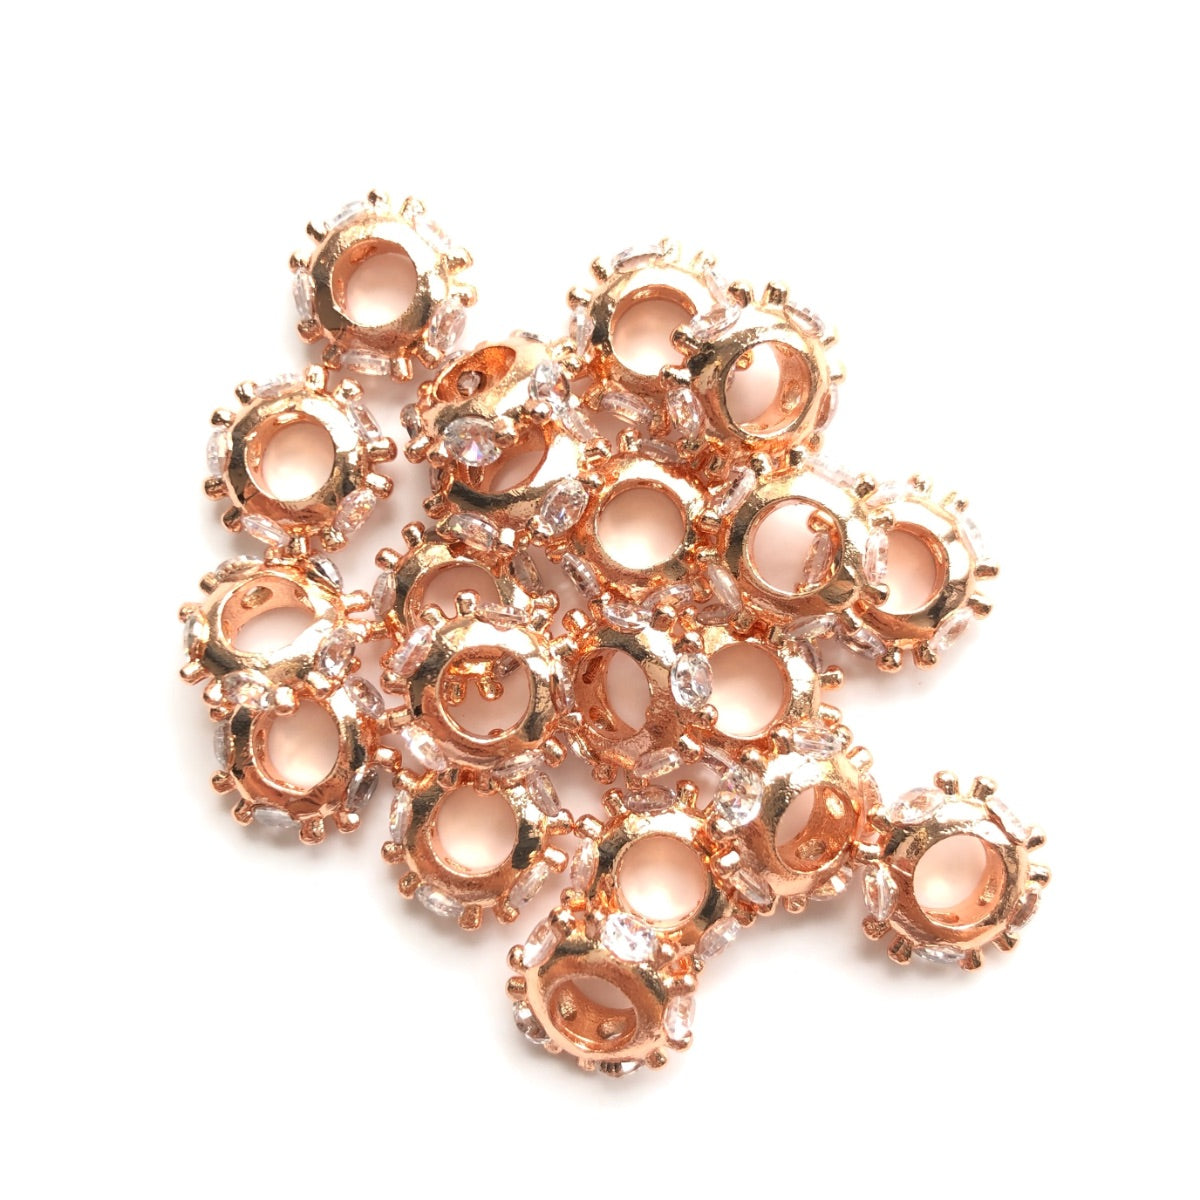 20pcs/lot 10*3mm Big Size CZ Pave Wheel Rondelle Spacers Rose Gold CZ Paved Spacers New Spacers Arrivals Rondelle Beads Charms Beads Beyond